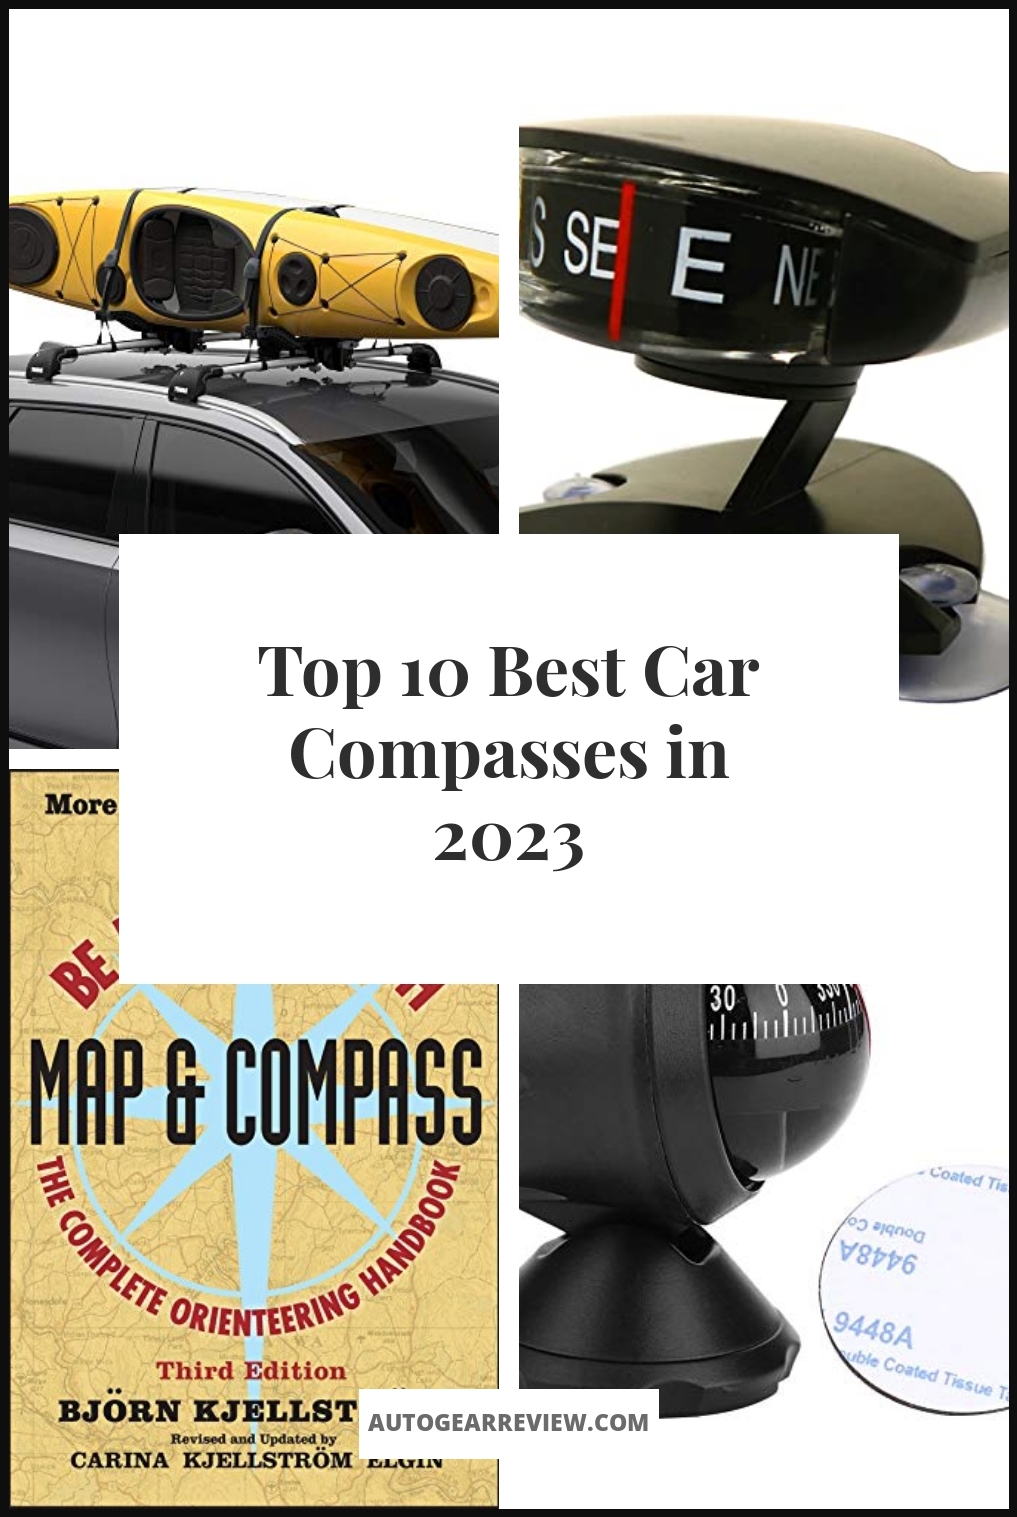 Best Car Compasses - Buying Guide